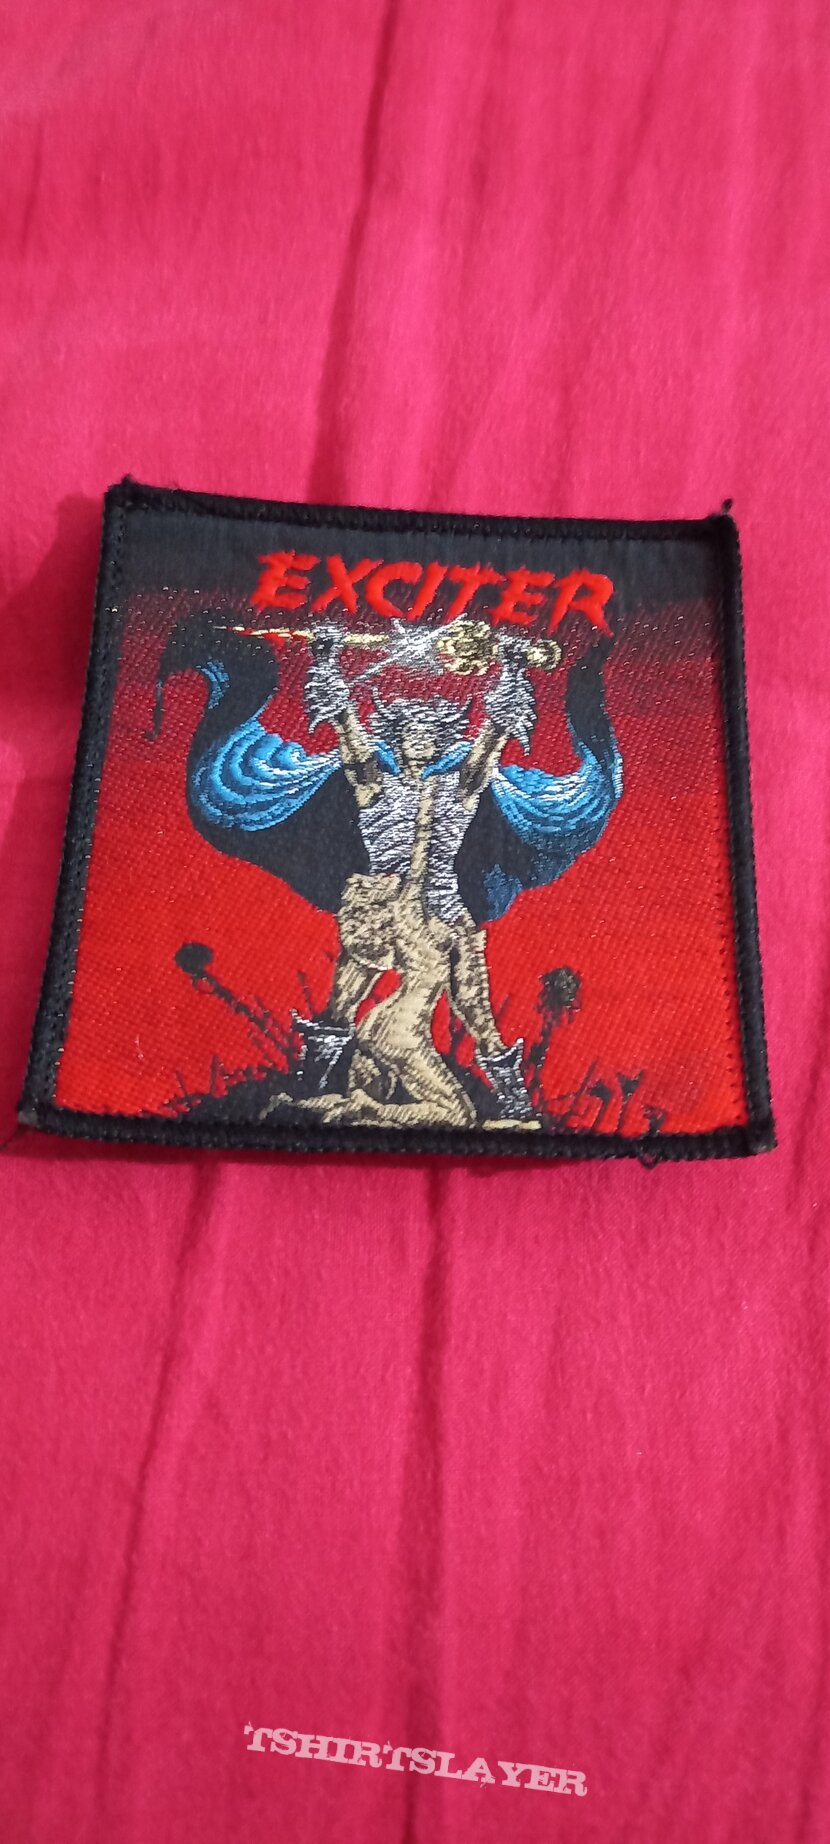 Exciter and Judas Priest patches